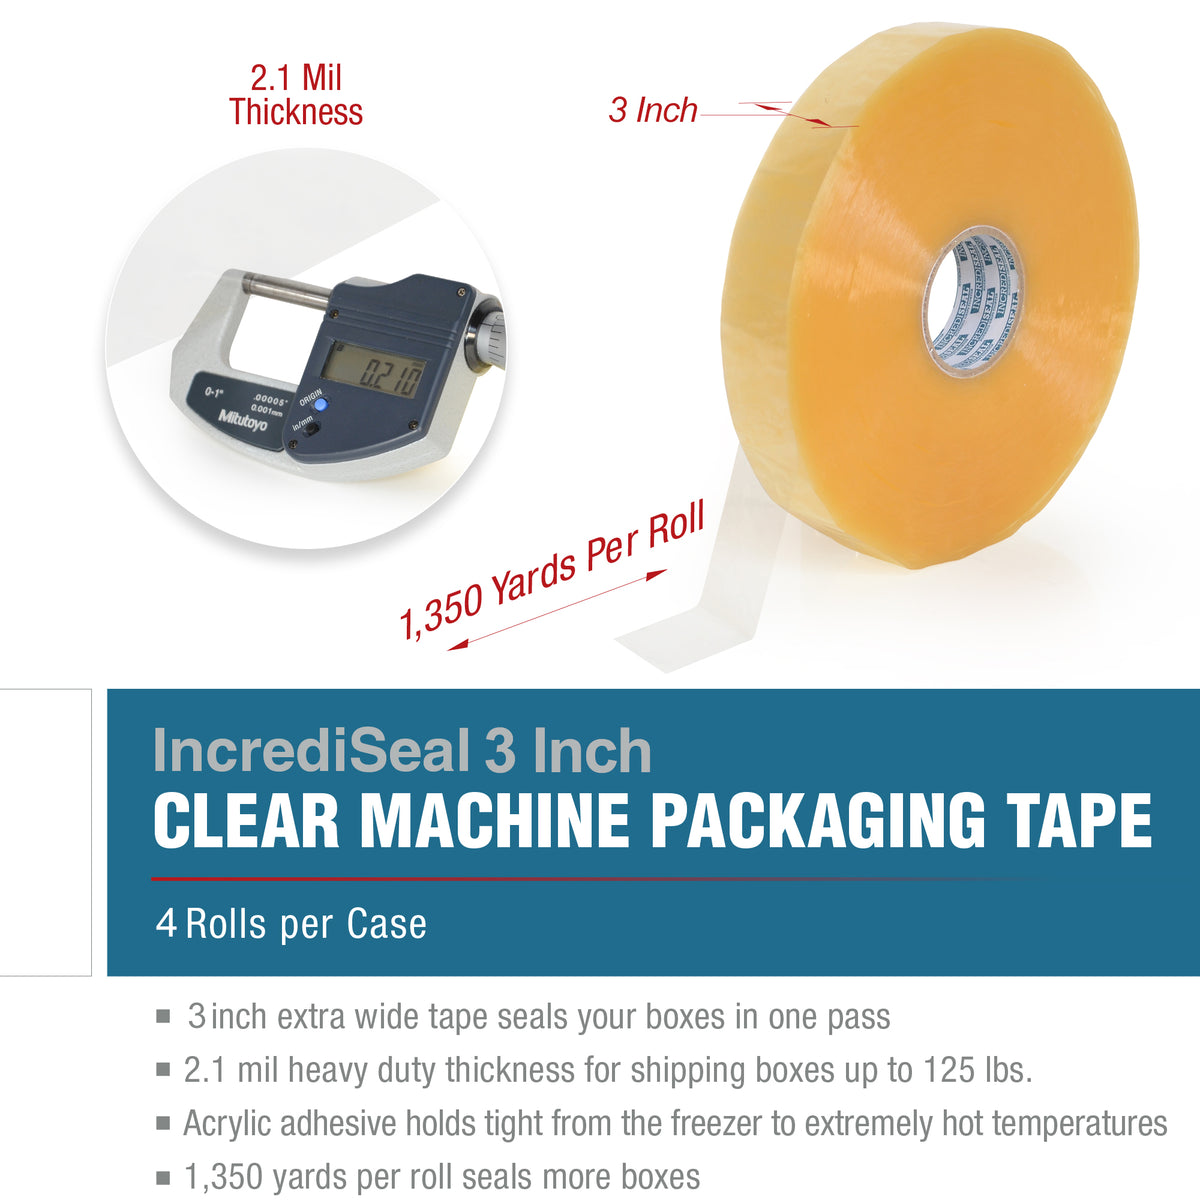 Tape Logic - Packing Tape: 4″ Wide, Brown, Rubber Adhesive